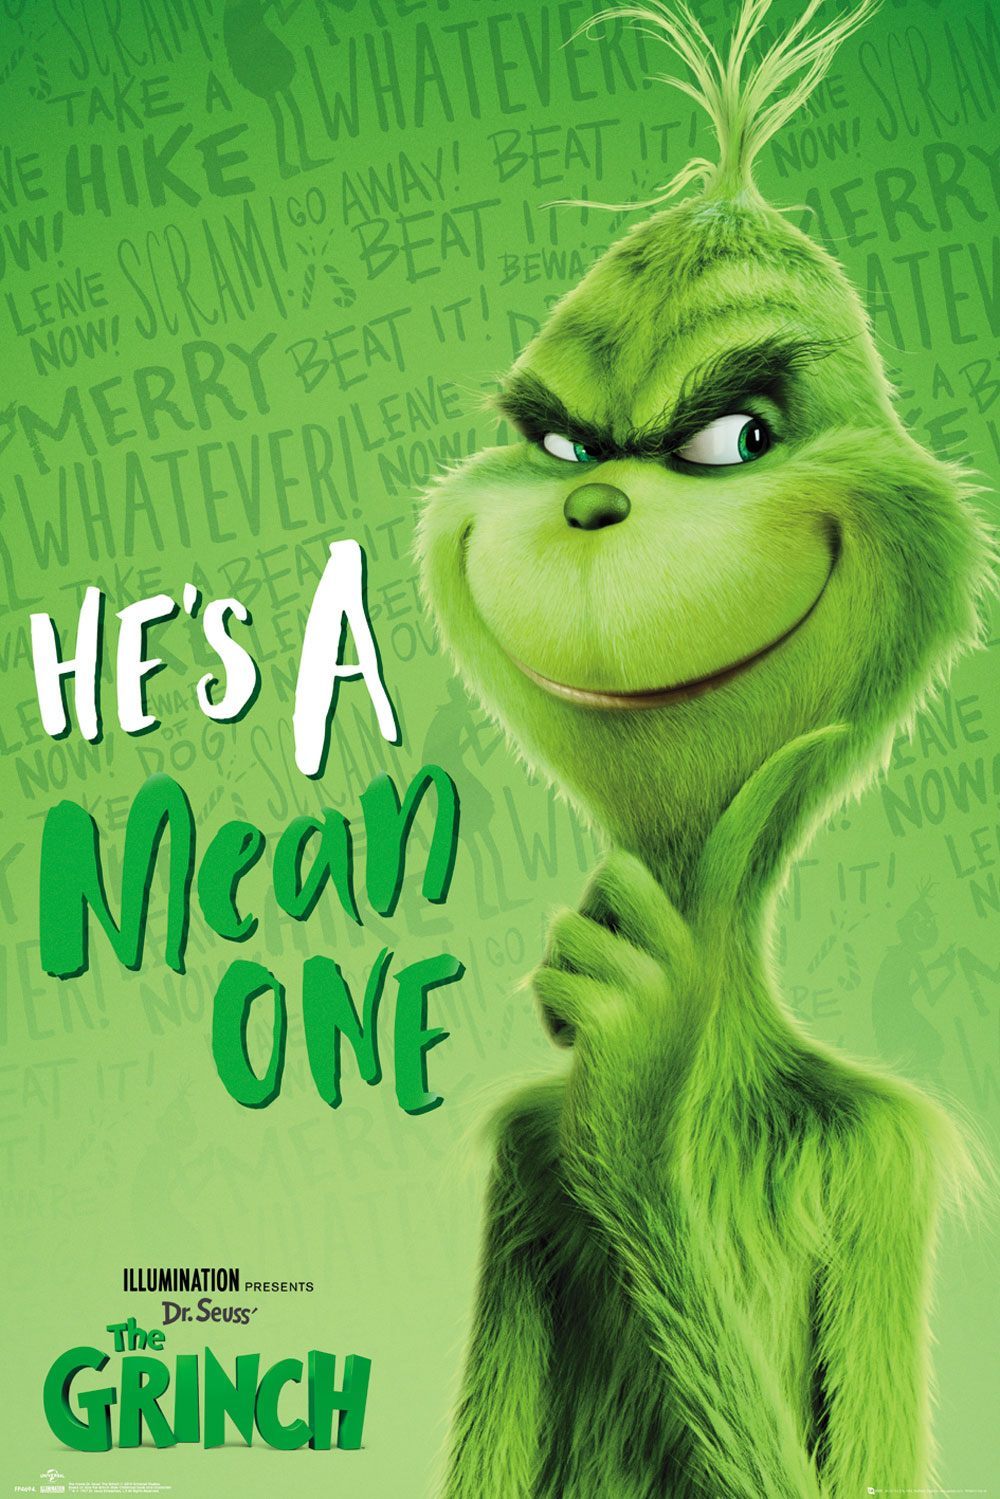 The Grinch (2018) review